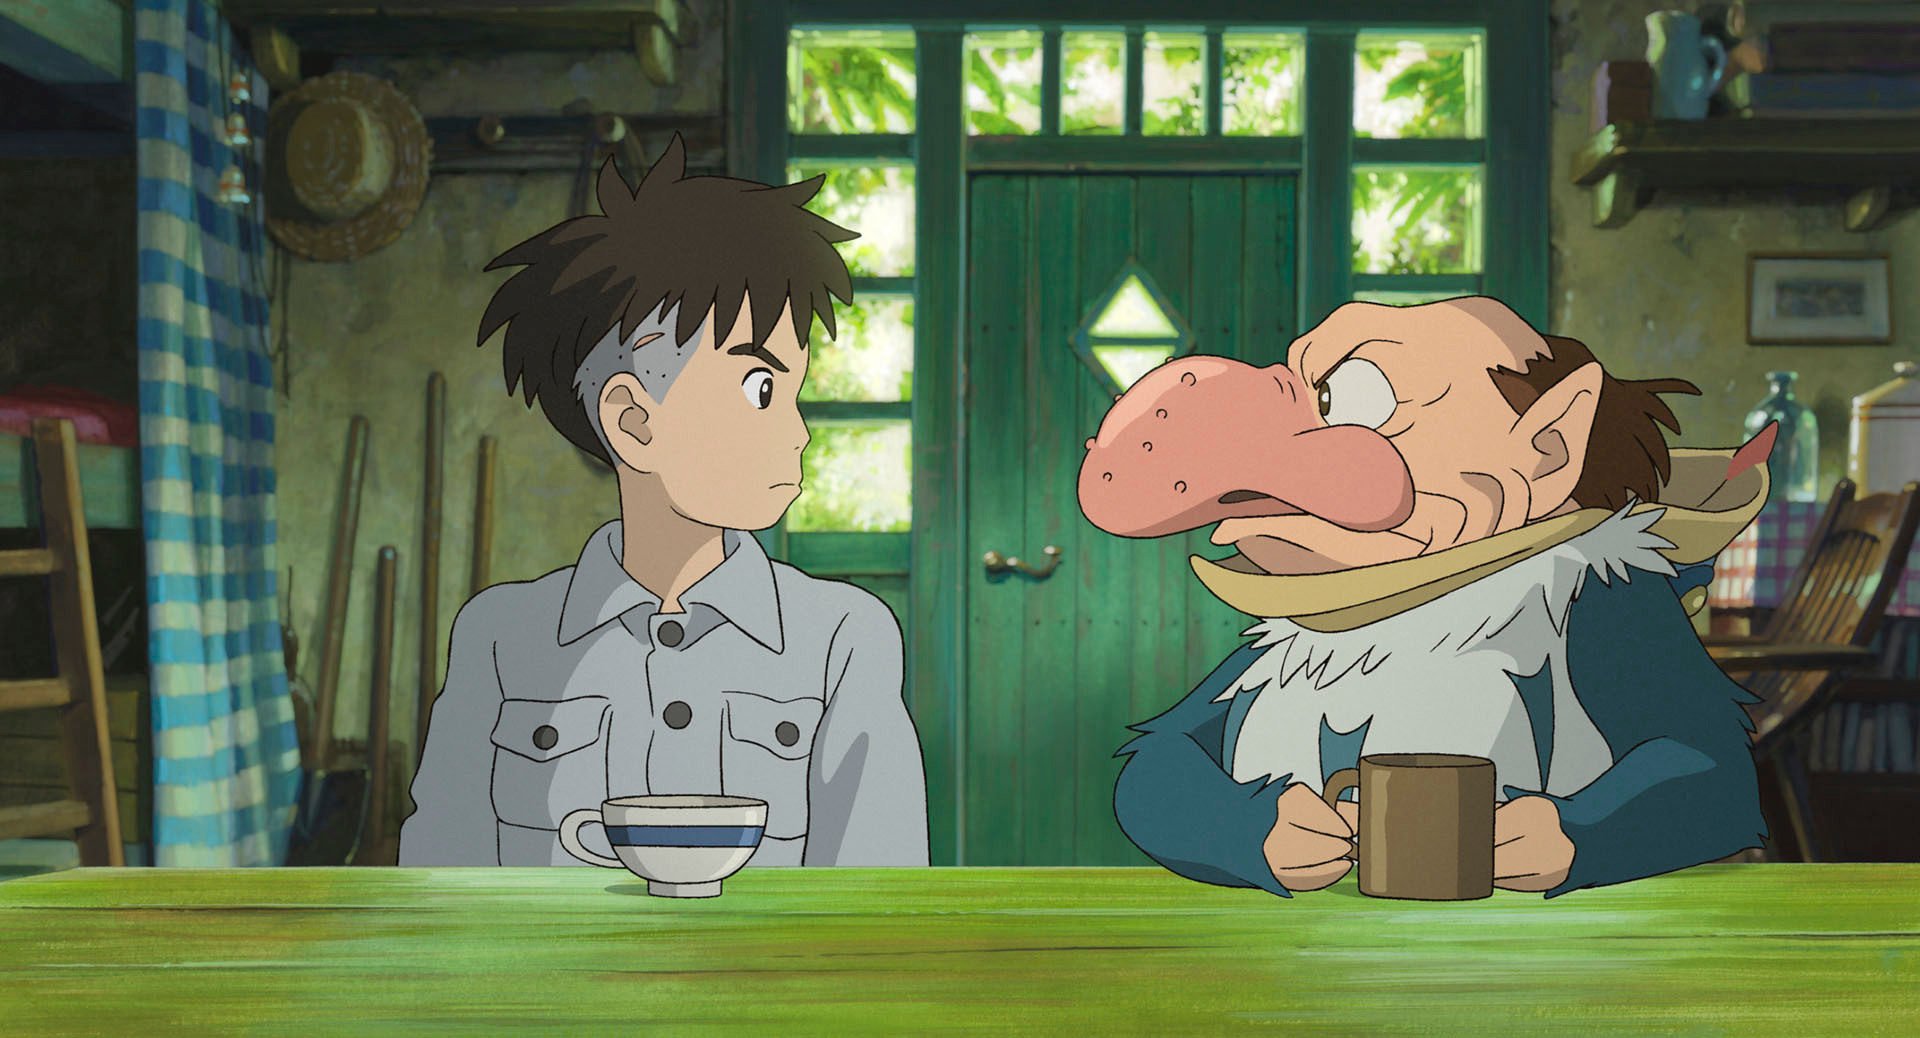 Mahito Maki (voiced by Luca Padovan in English and Soma Santoki in Japanese) 
and Grey Heron (voiced by Robert Pattinson in English and Masaki Suda in Japanese) in a screen grab from ‘The Boy And The Heron”. Photo: AP